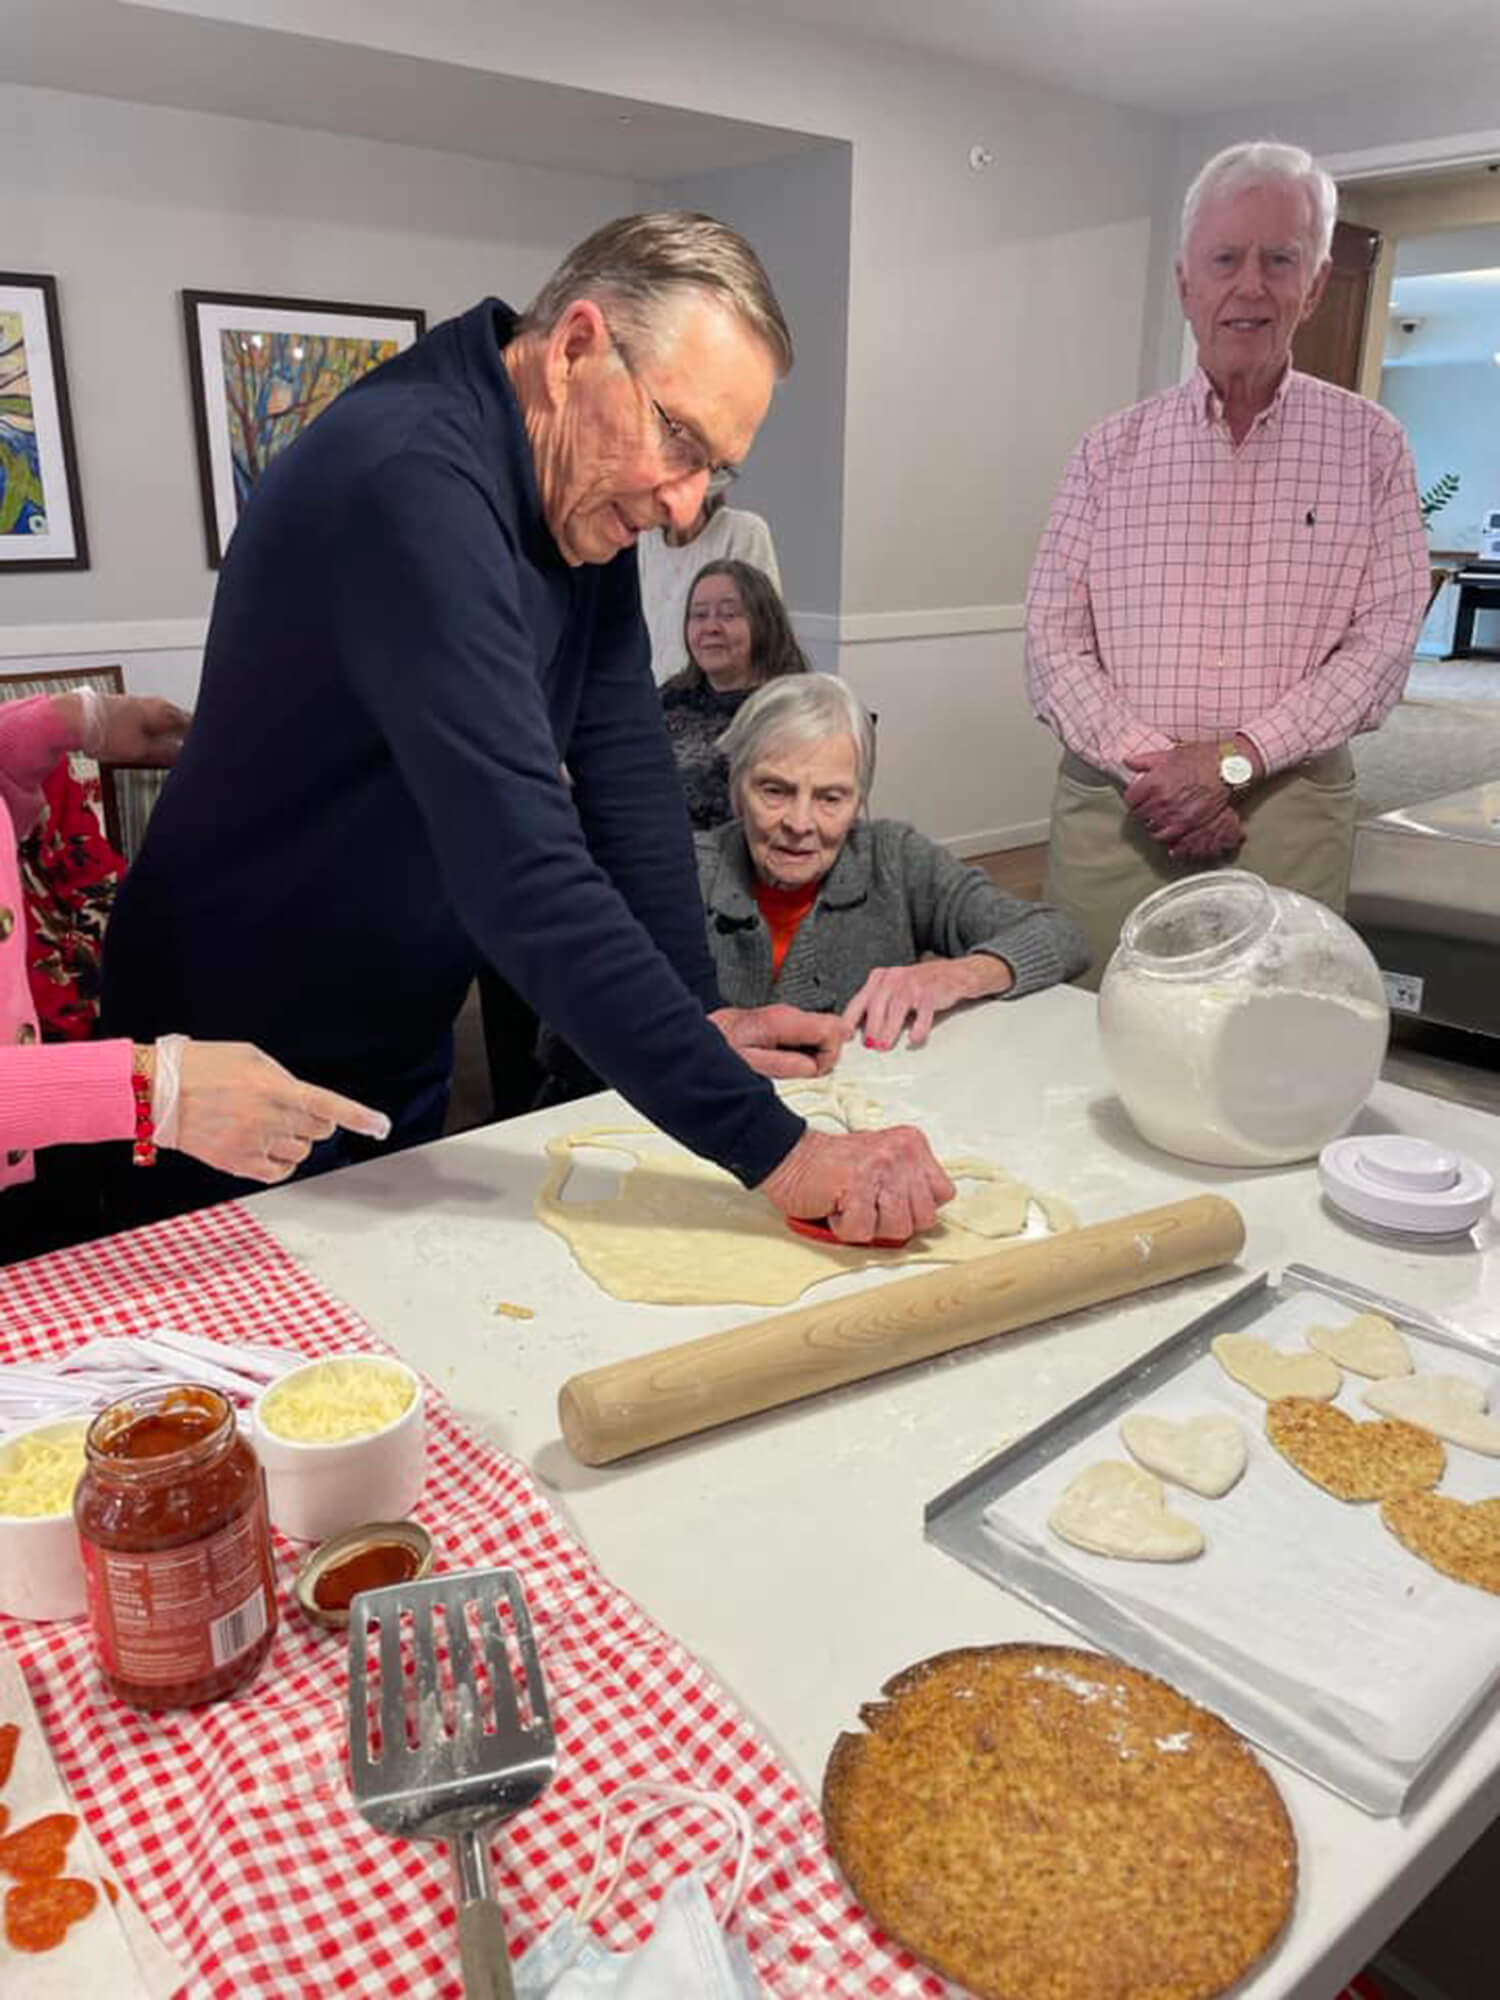 Seniors actively participating in a cooking class, rolling dough for pastries in Edina, MN.